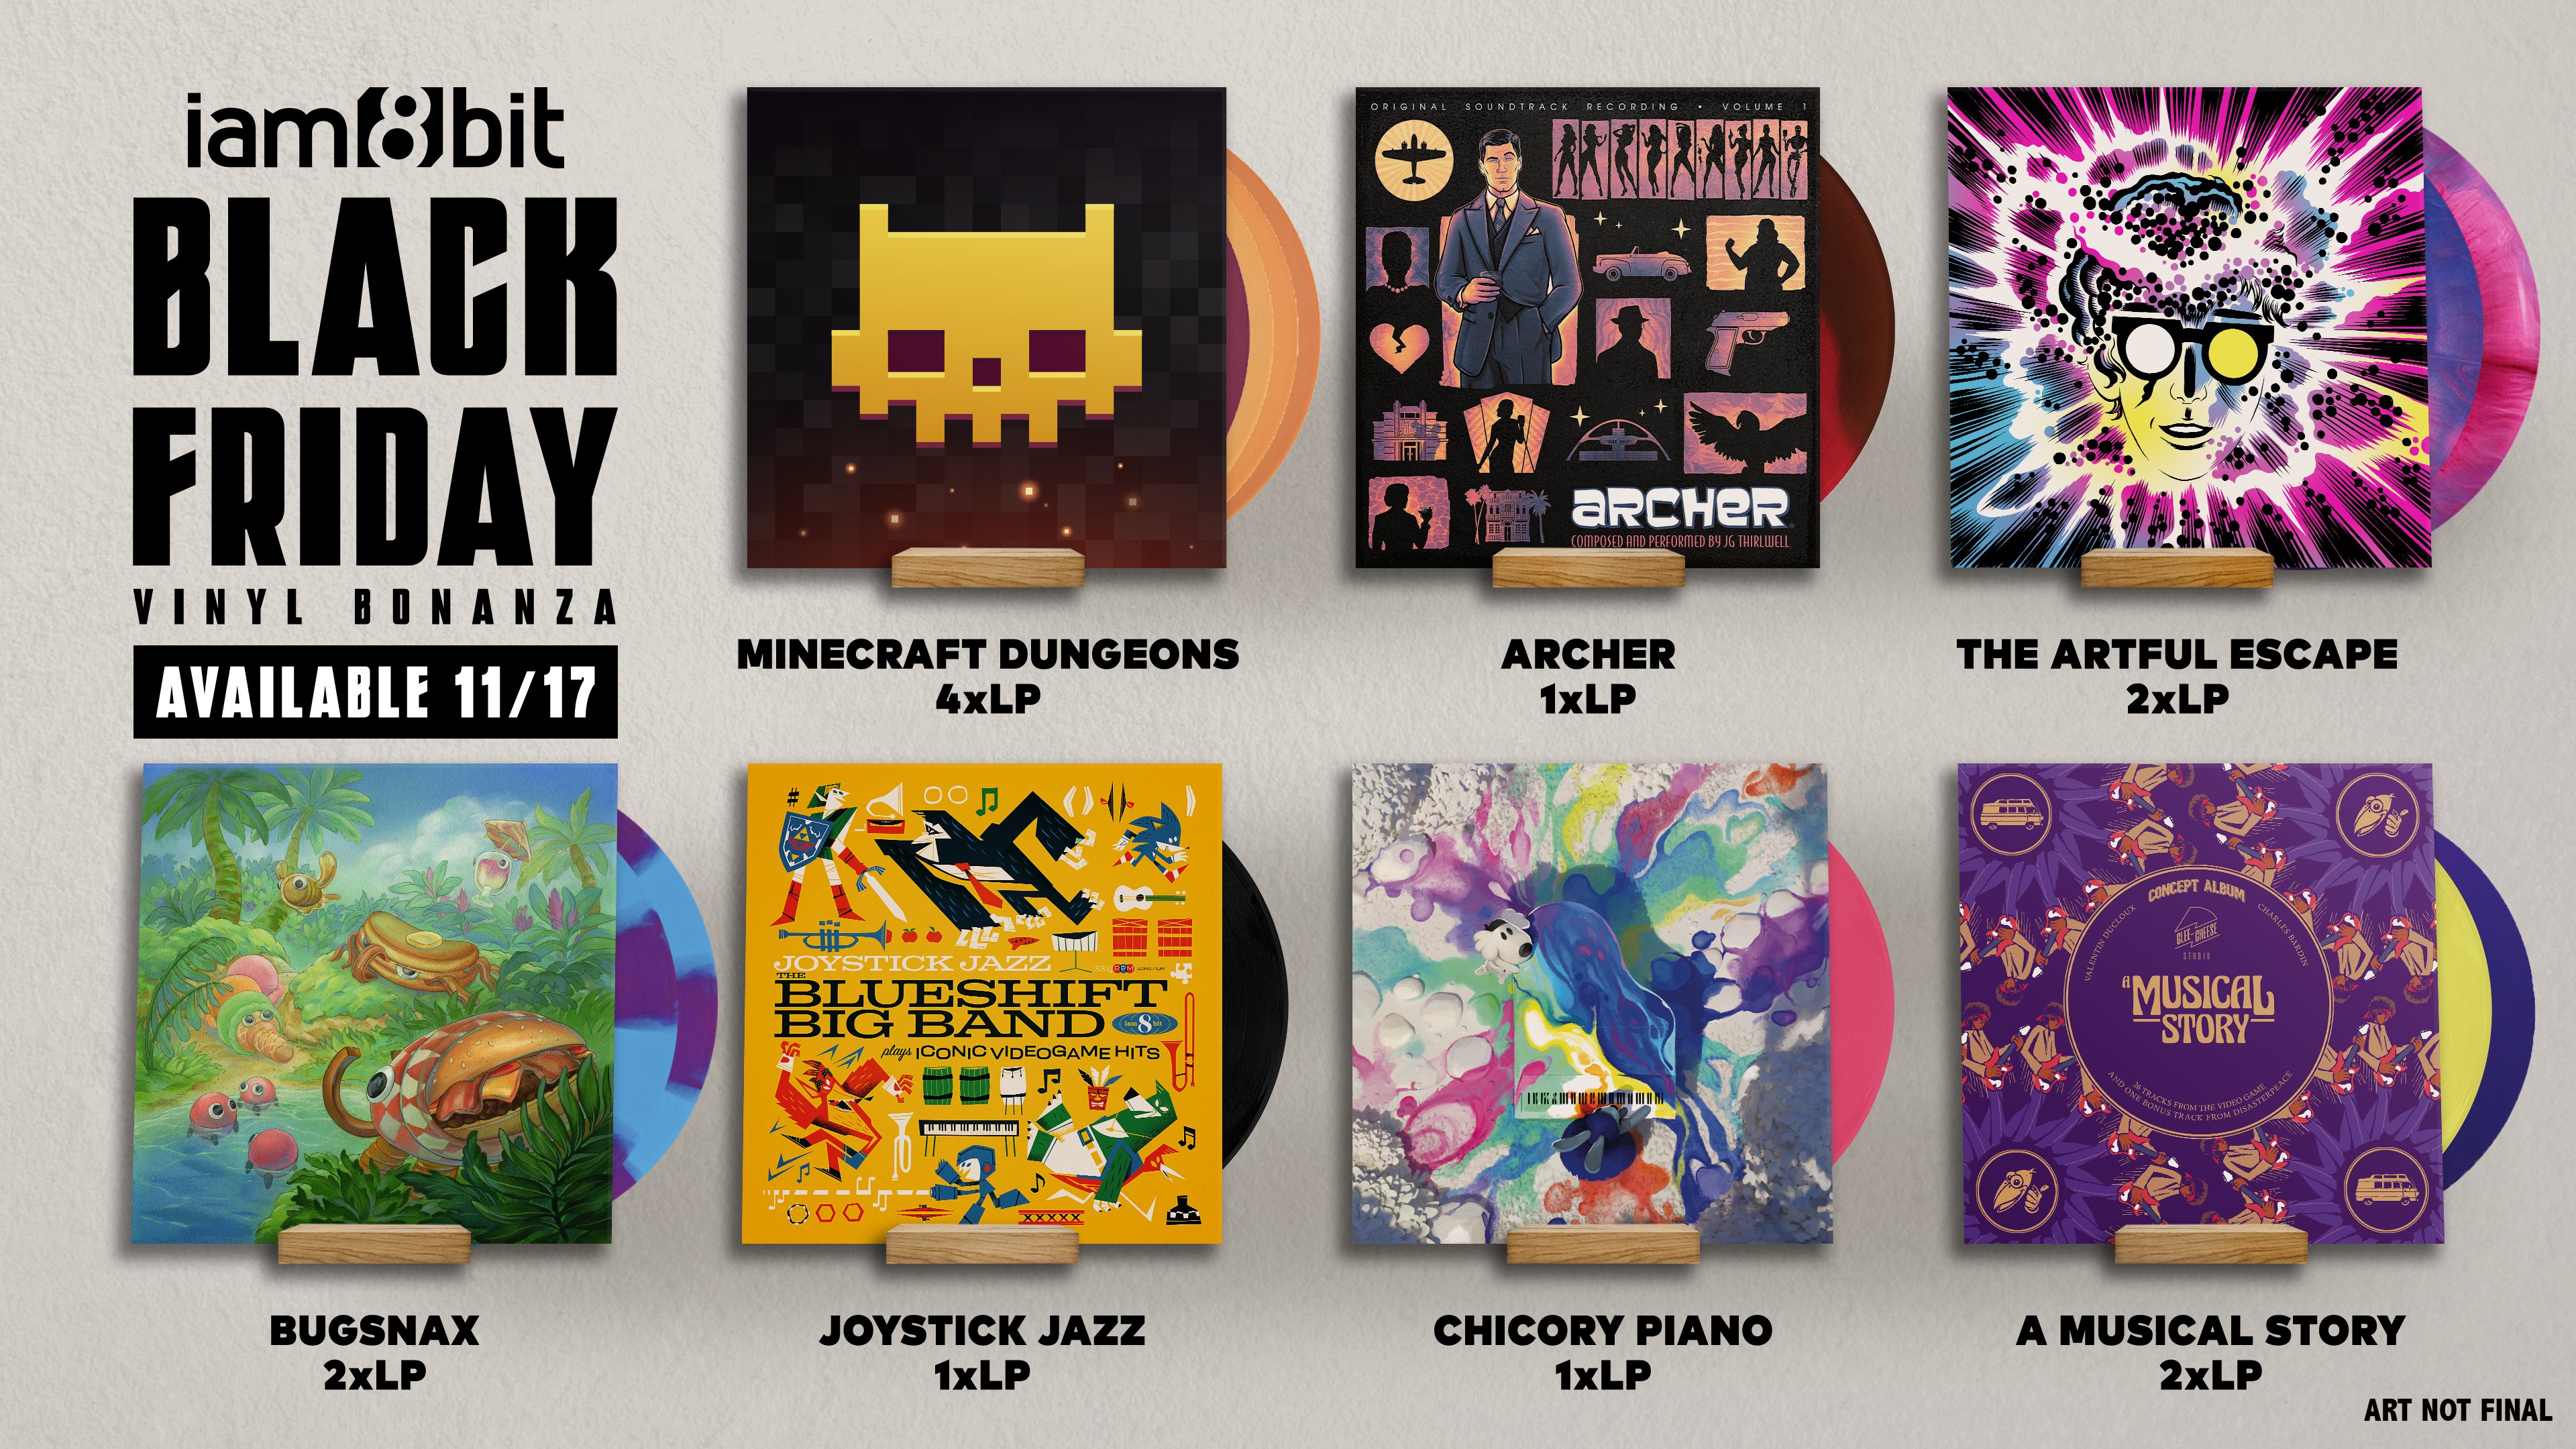 iam8bit on Twitter: "Introducing the Black Friday Vinyl Bonanza! It's 7 new vinyl titles, all going up for preorder on Thursday, November 17th. Order $50 or more and get a FREE